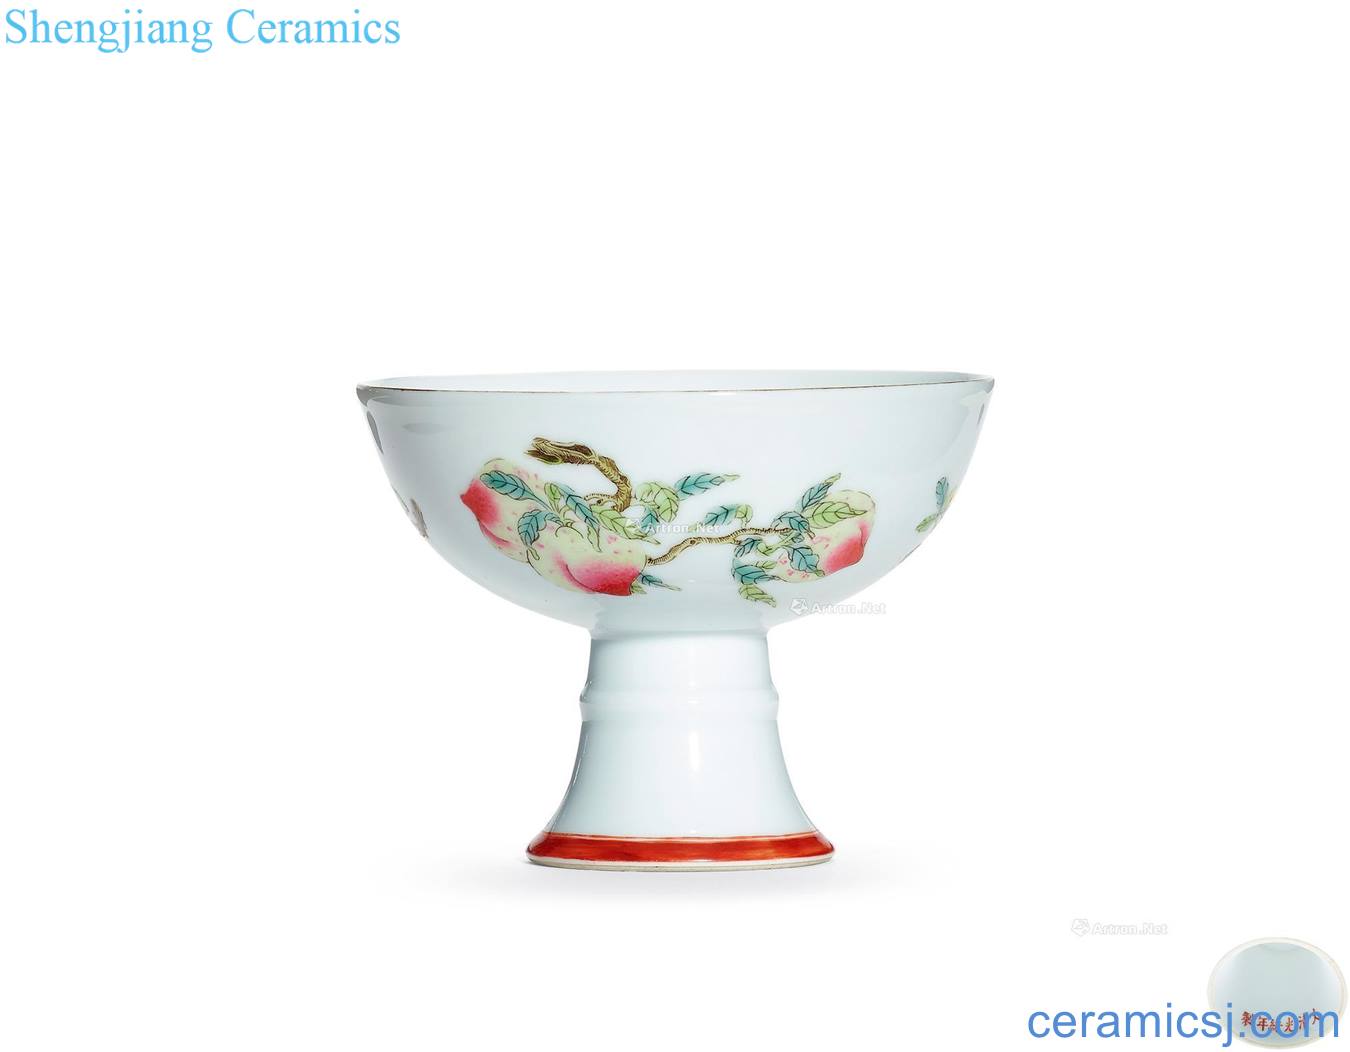 Pastel reign of qing emperor guangxu sanduo footed bowl